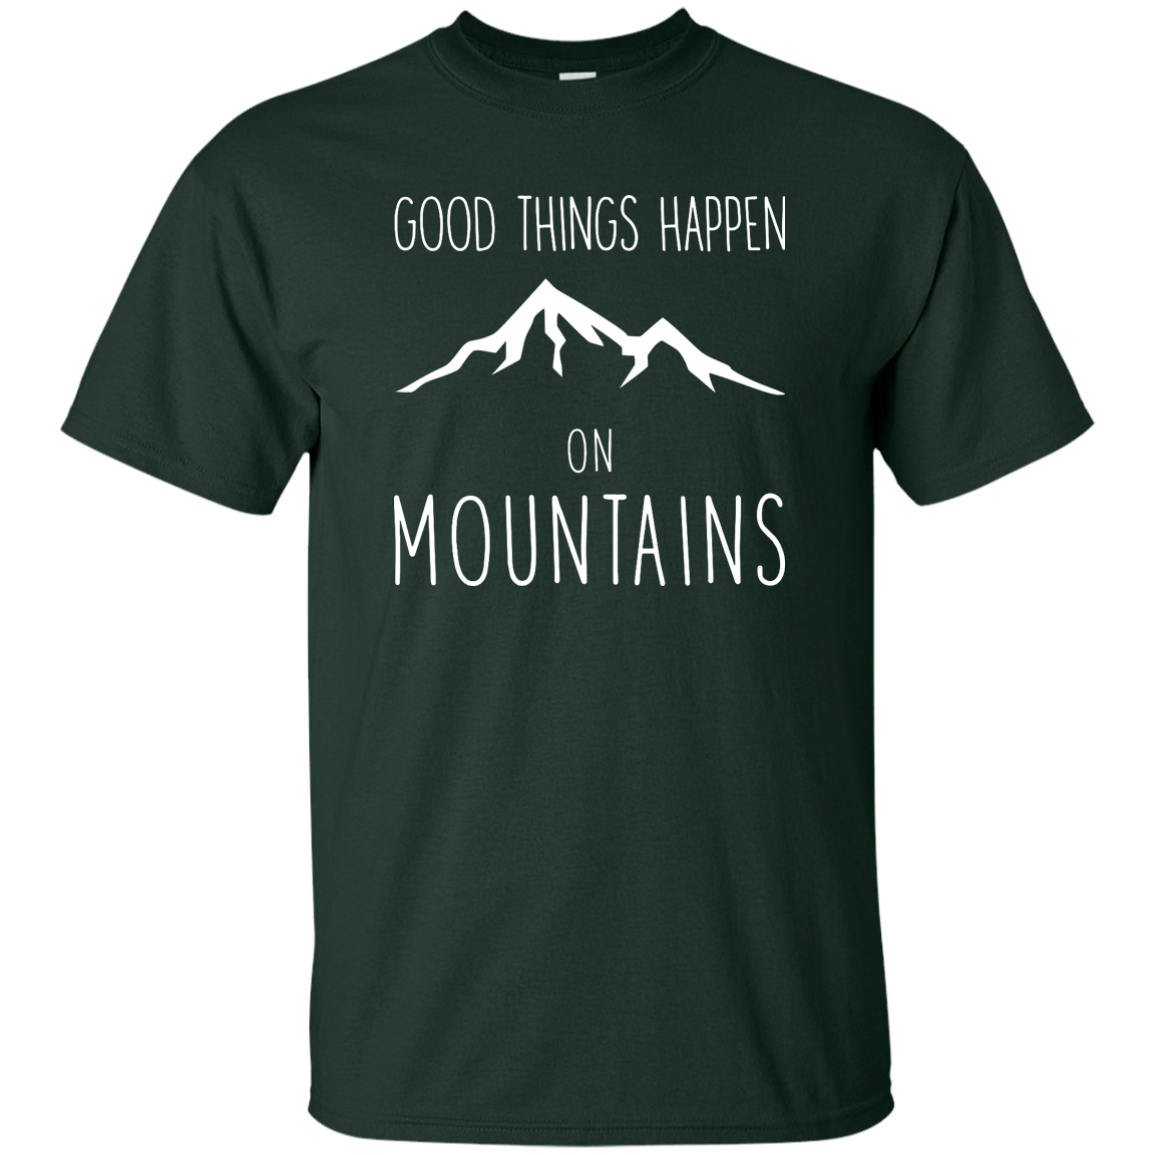 Good Things Happen On The Mountains Men's Tees and V-Neck - Powderaddicts